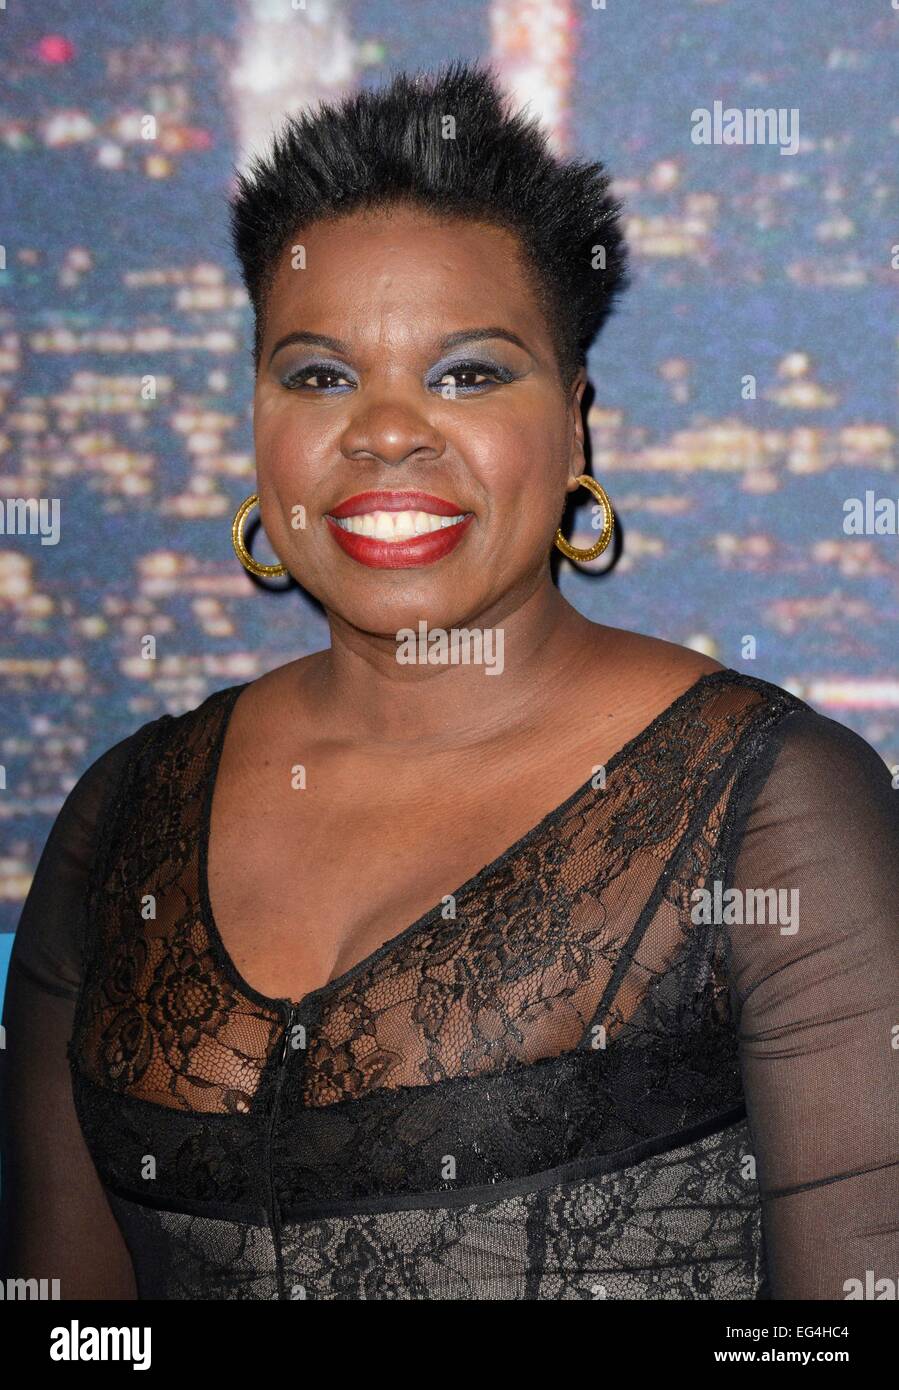 Low-Res abspeichern - new-york-ny-usa-15th-feb-2015-leslie-jones-at-arrivals-for-saturday-EG4HC4